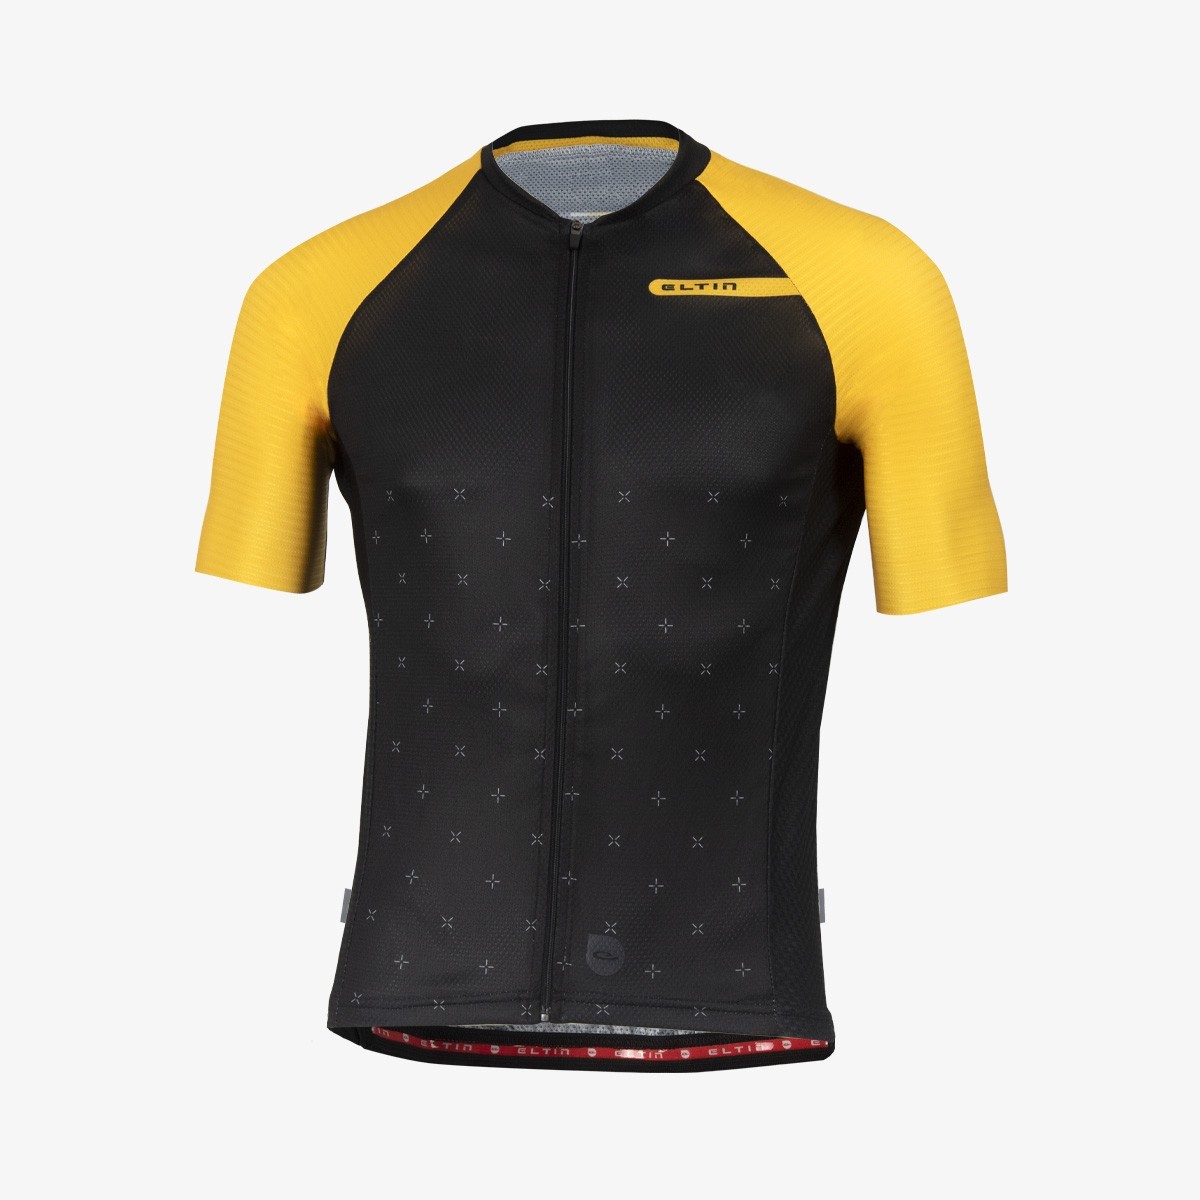 https://eltincycling.com/5073-thickbox_default/maillot-ciclismo-resistance-negro-y-mostaza.jpg